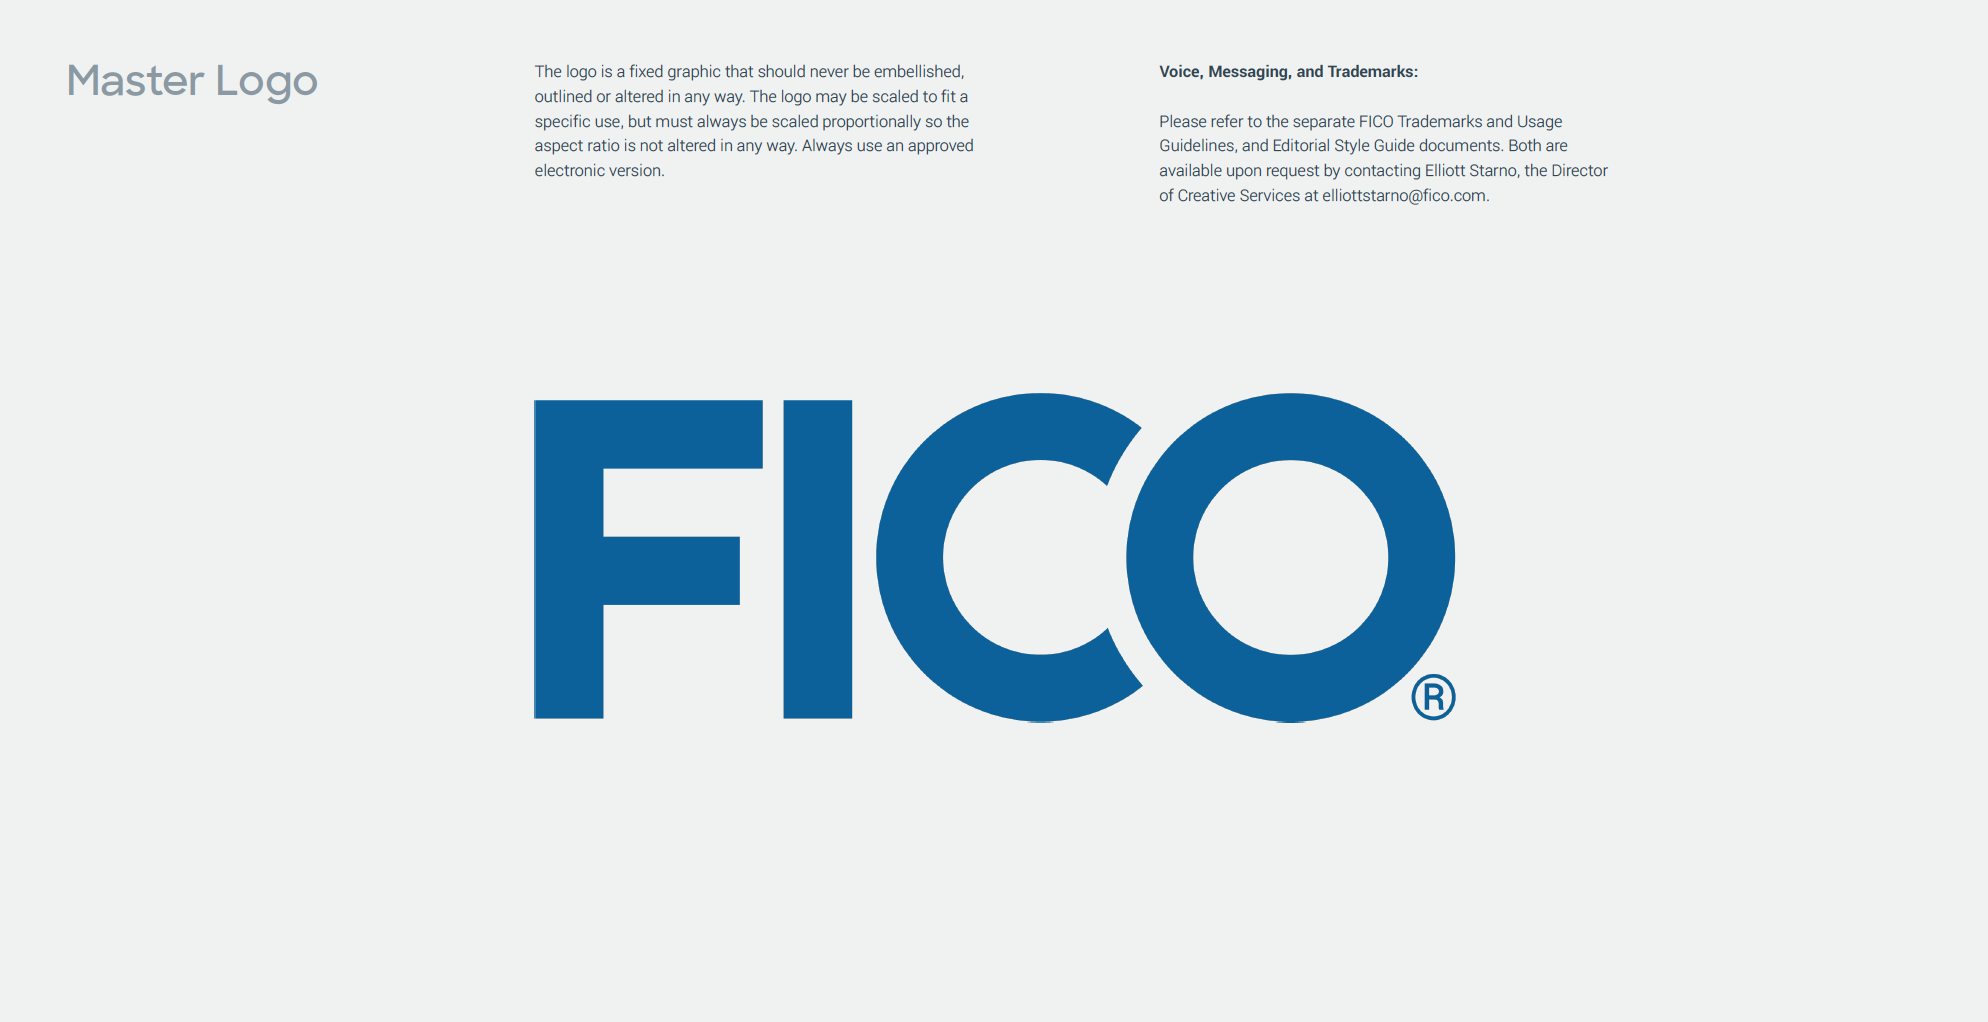 FICO Logo with Trademark